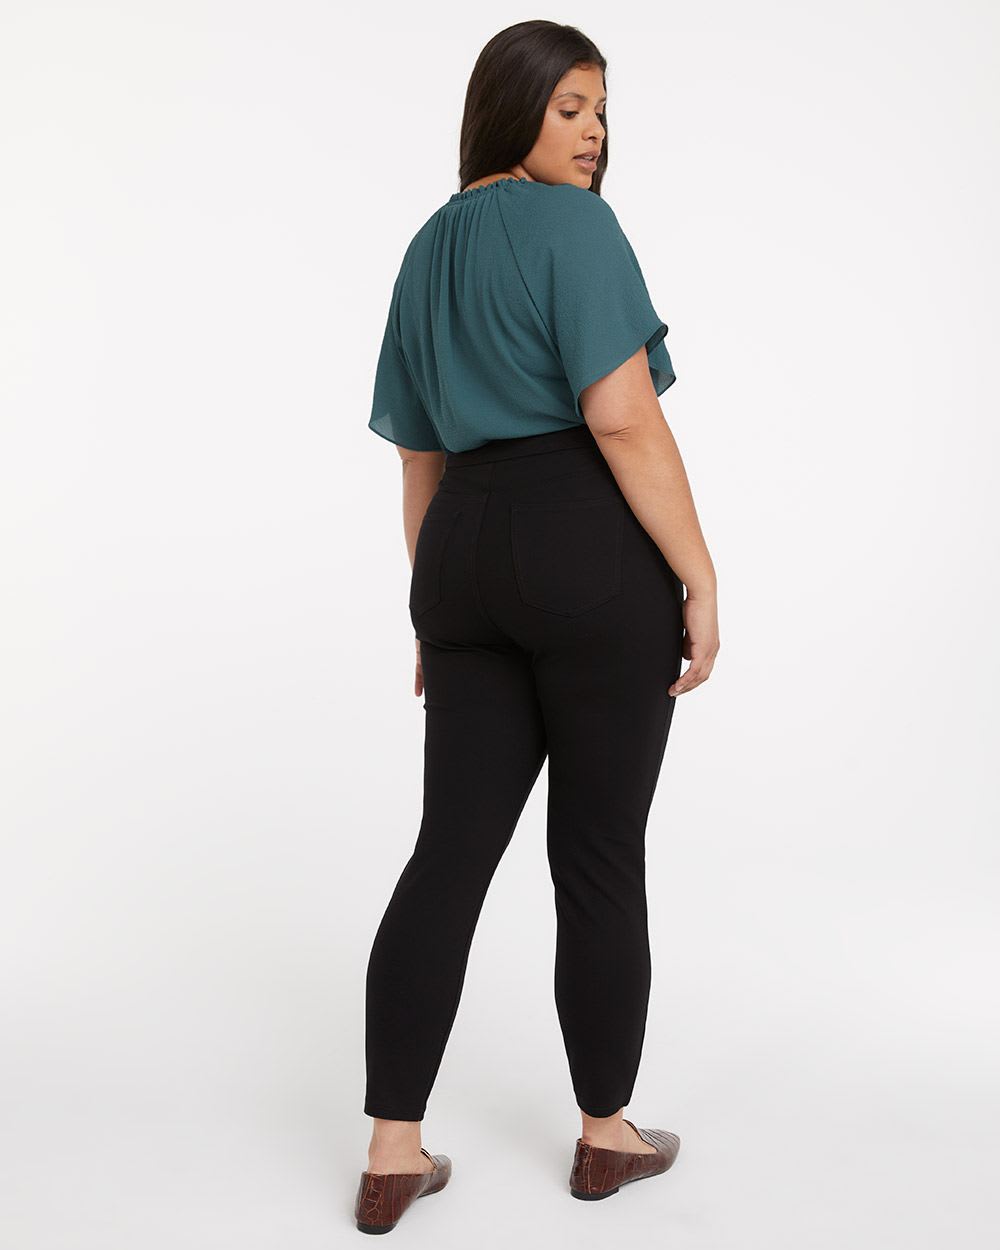 Black Leggings with Back Pockets - Tall